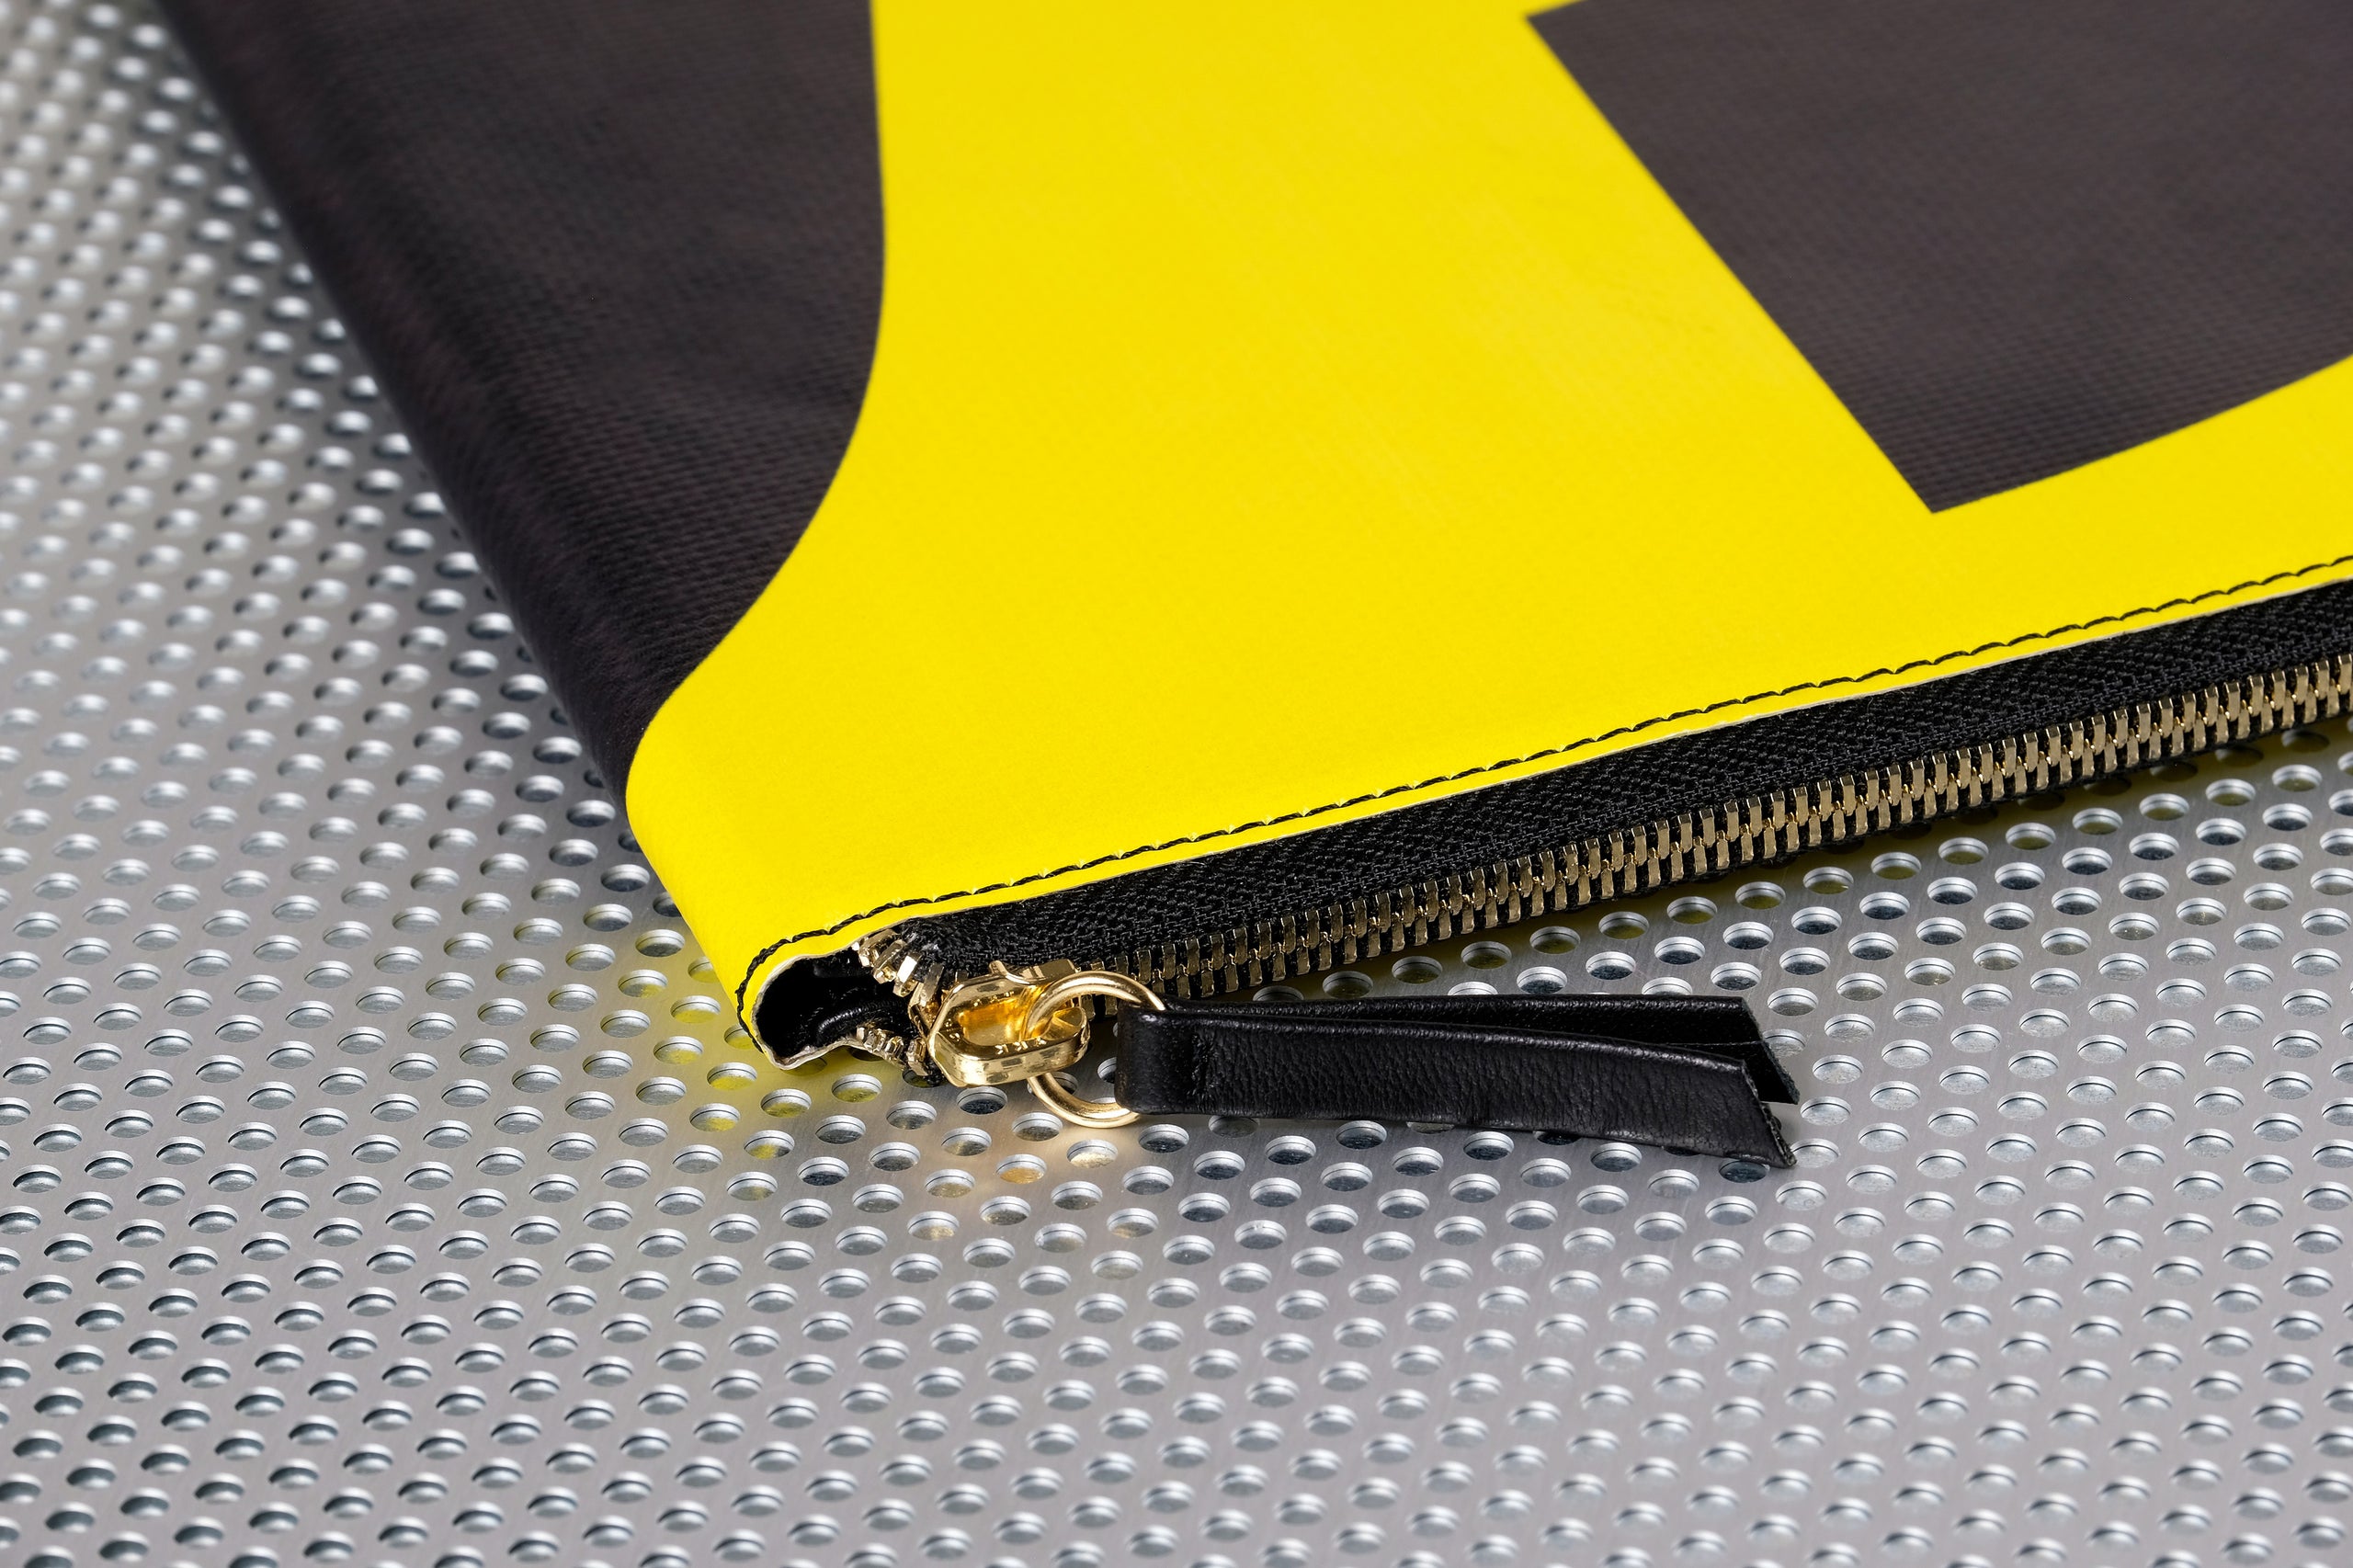 THE CLAUDE SIGNALS YELLOW LAPTOP SLEEVE